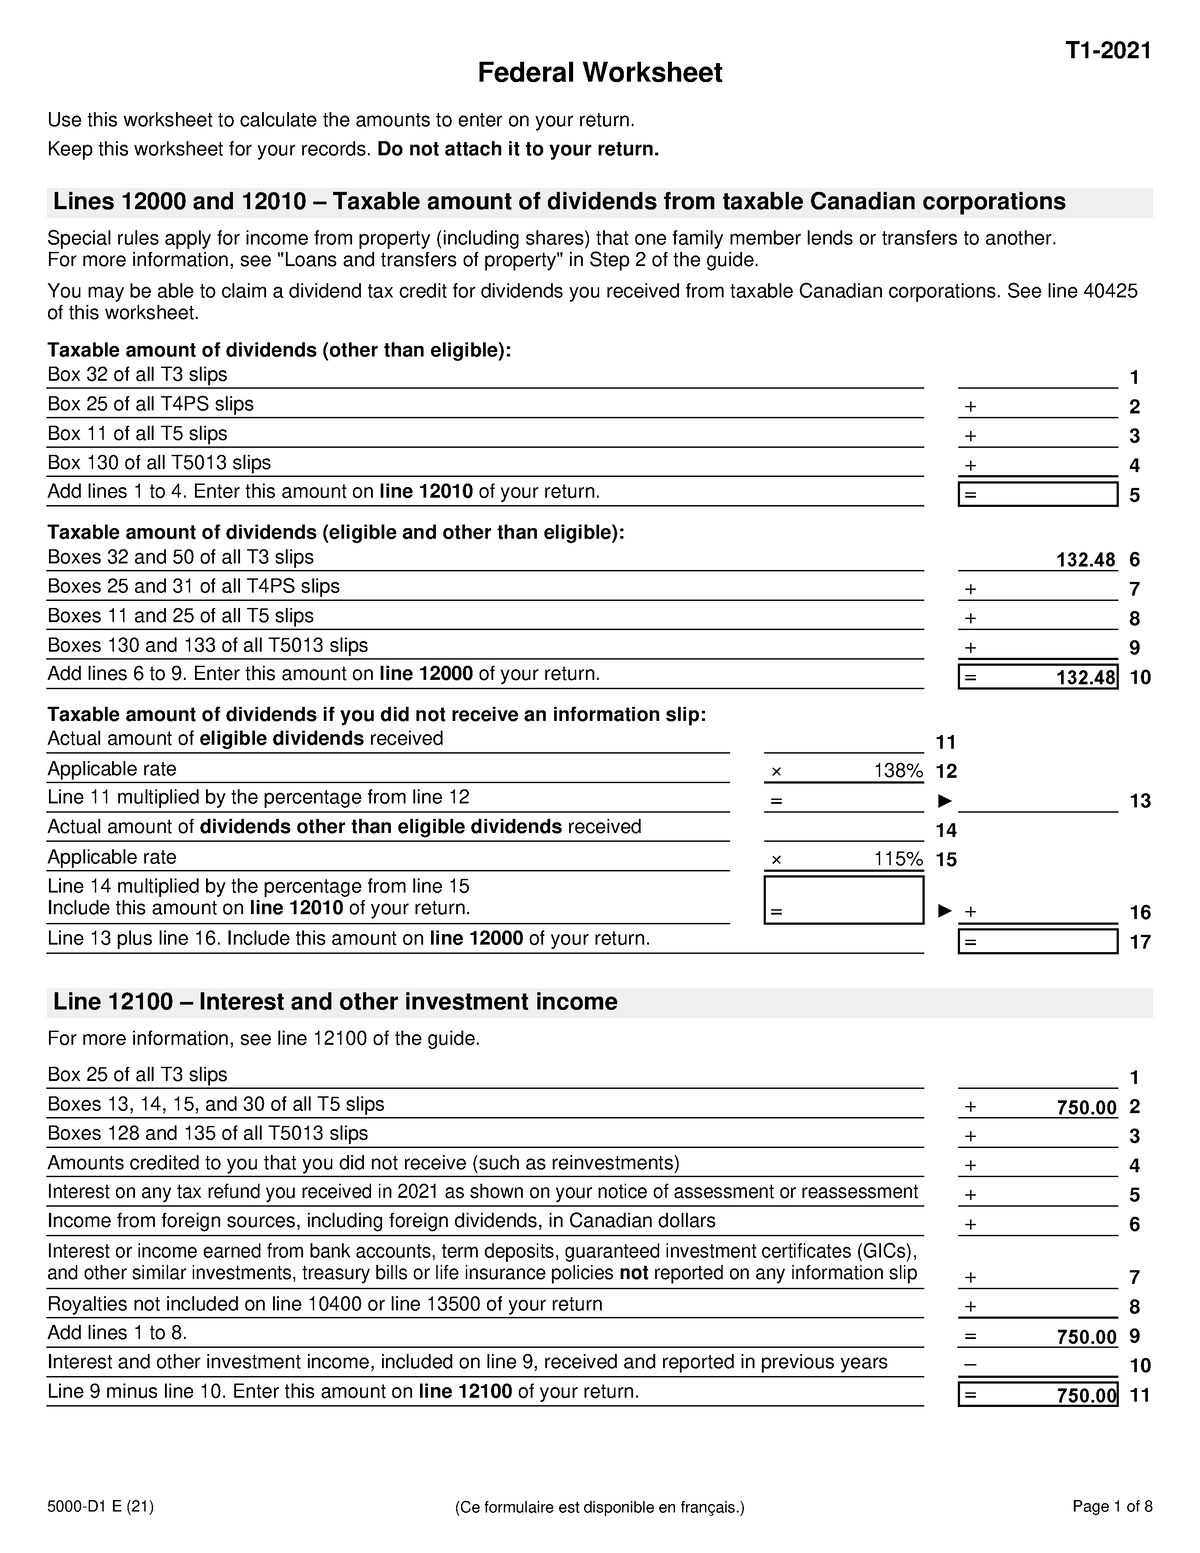 5000D1 Federal Worksheet2021e T1 Federal Worksheet Use this